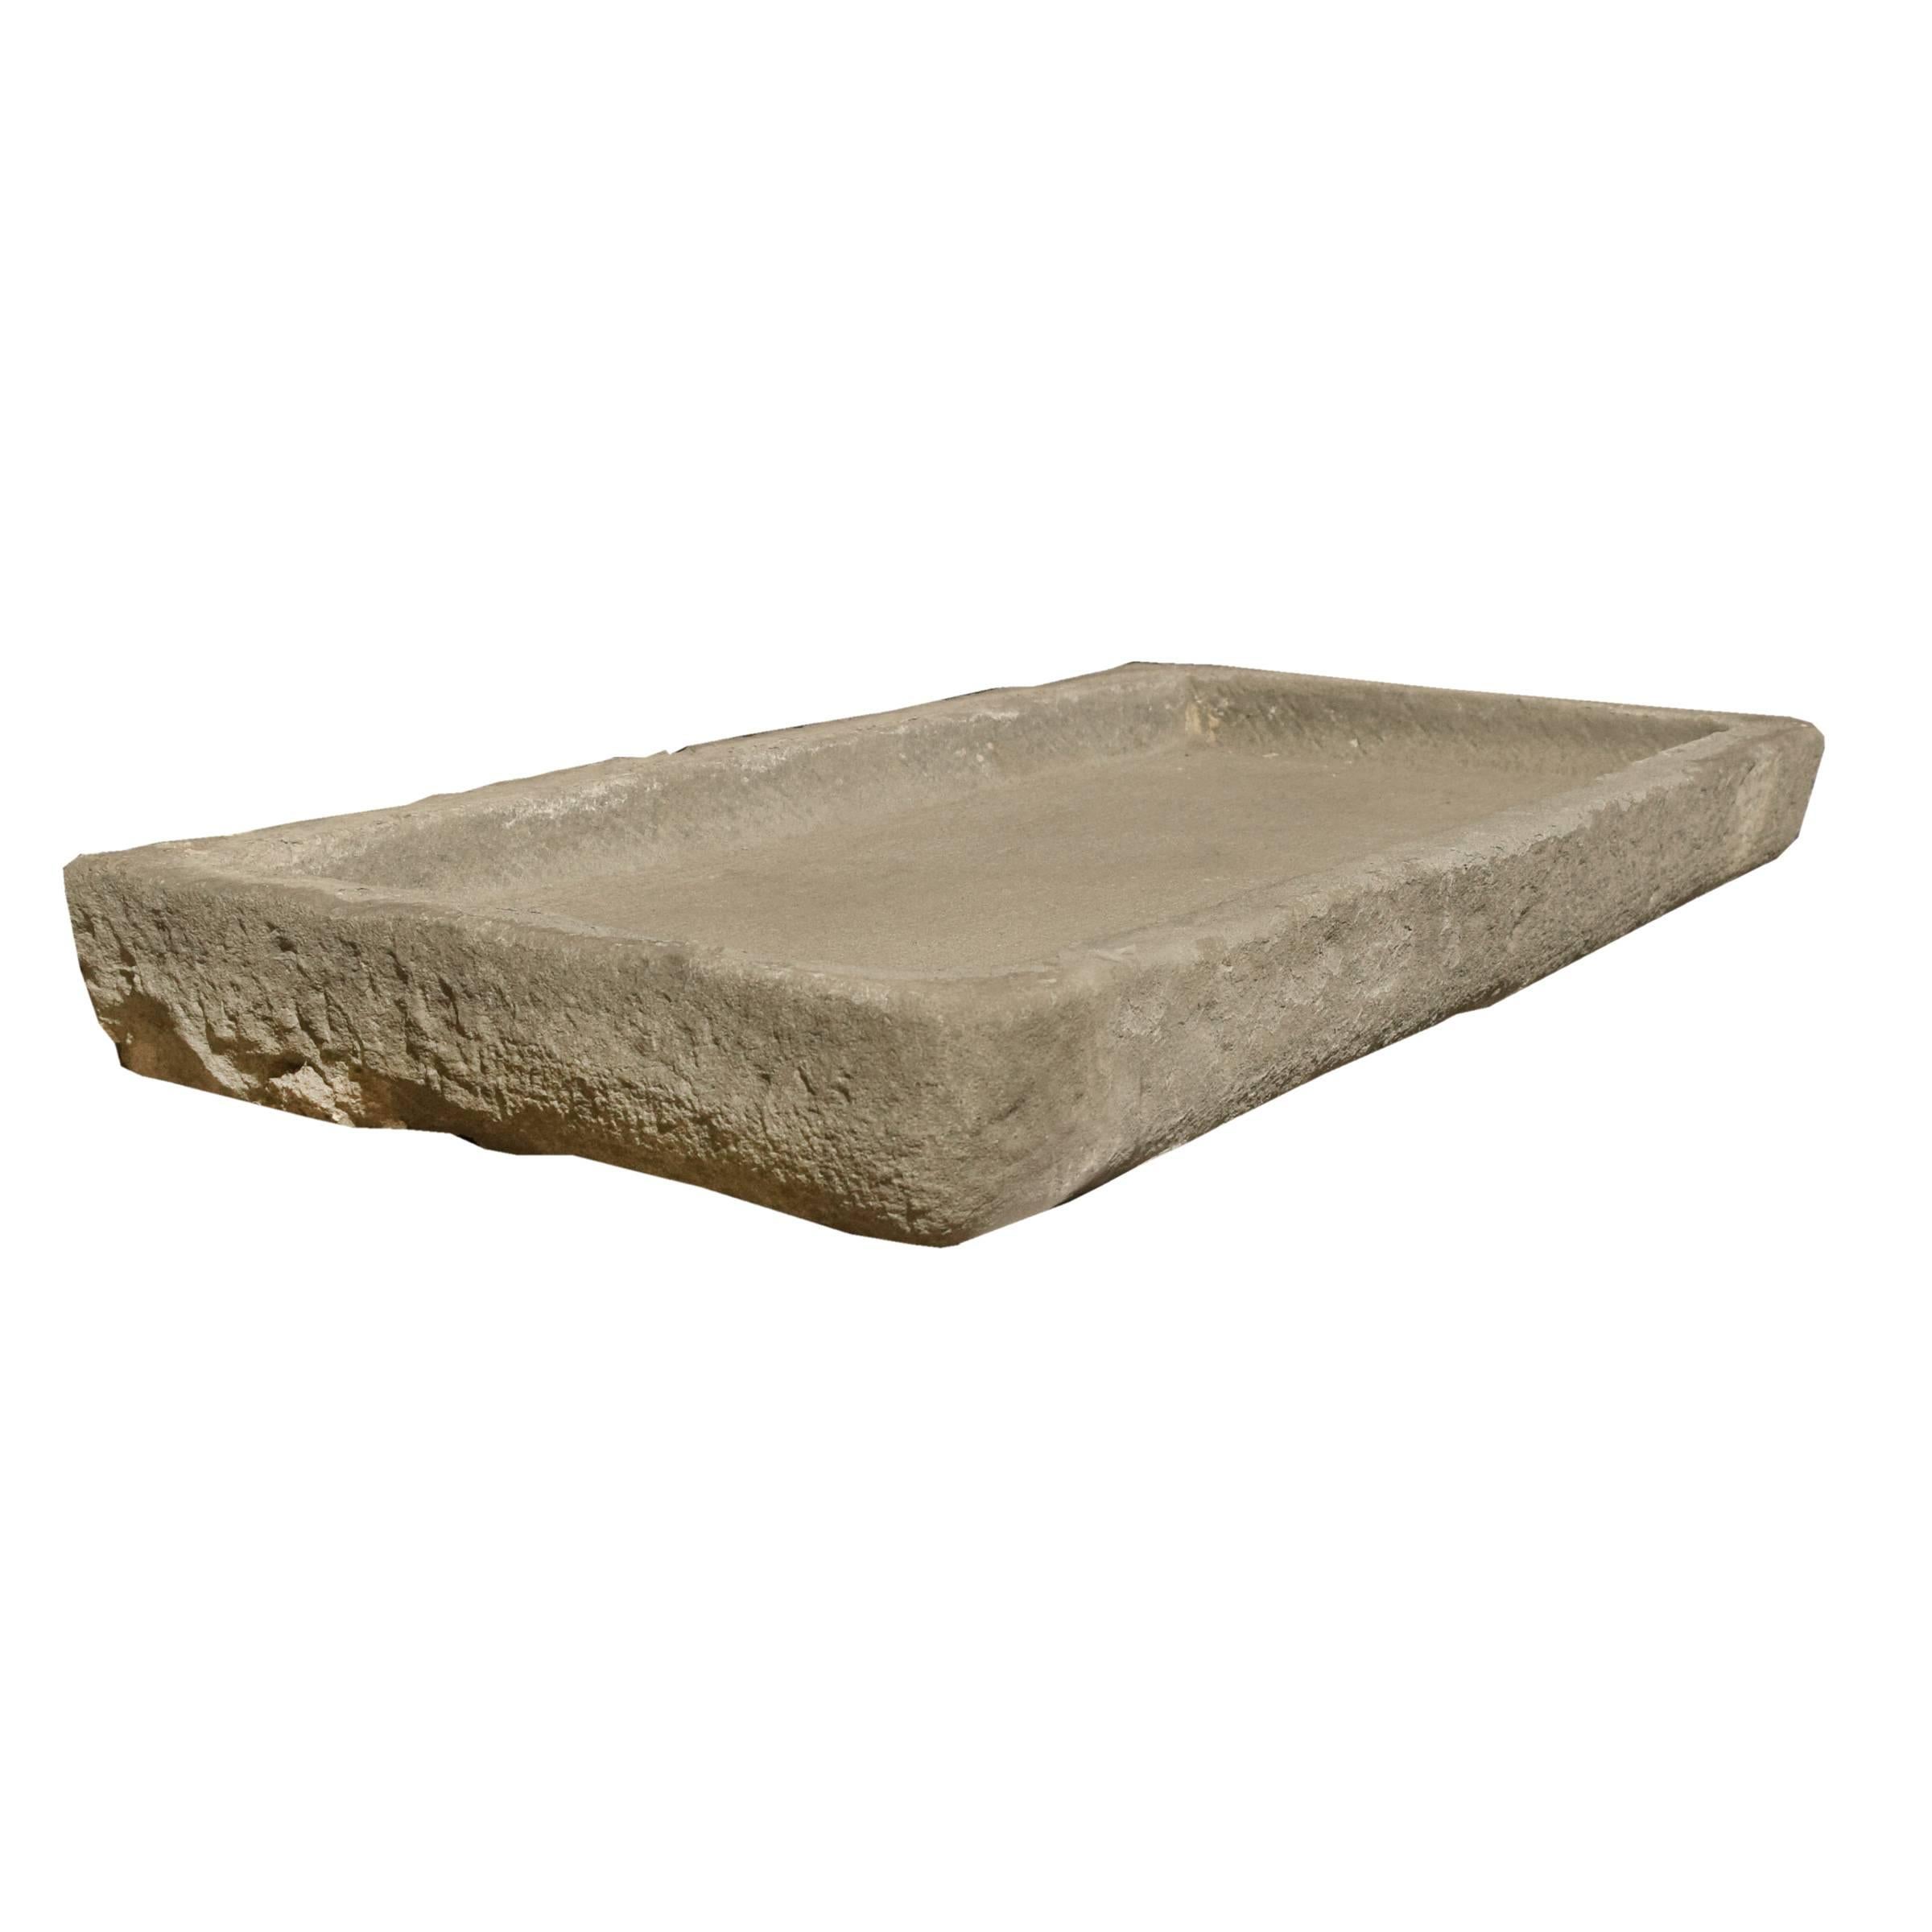 A fantastic Italian carved stone drain board/sink of a rectangular form with low sides and drainage hole, early 19th century.